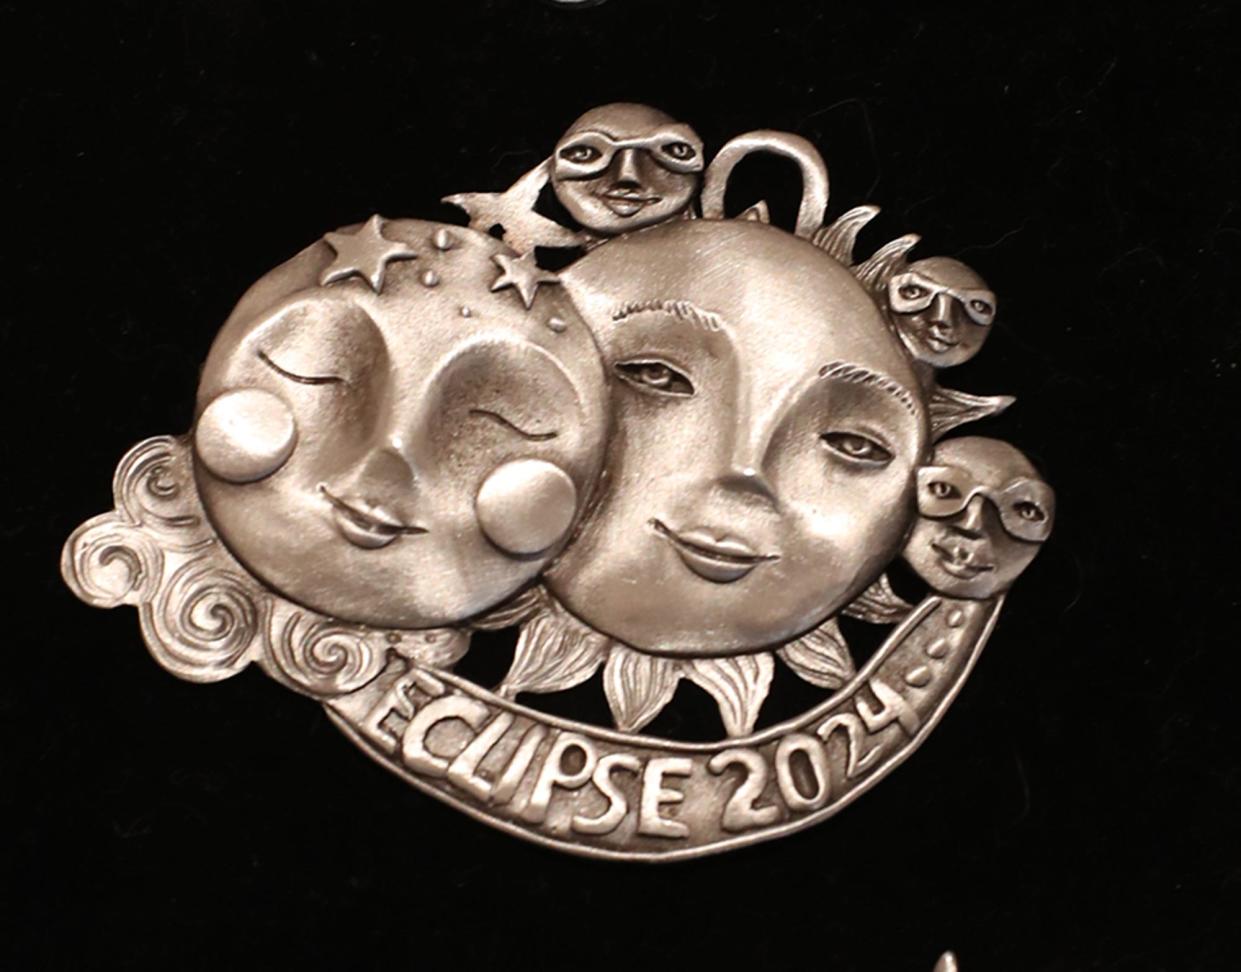 One of three ornaments created by Leandra Drumm for the eclipse at Don Drumm Studios & Gallery.